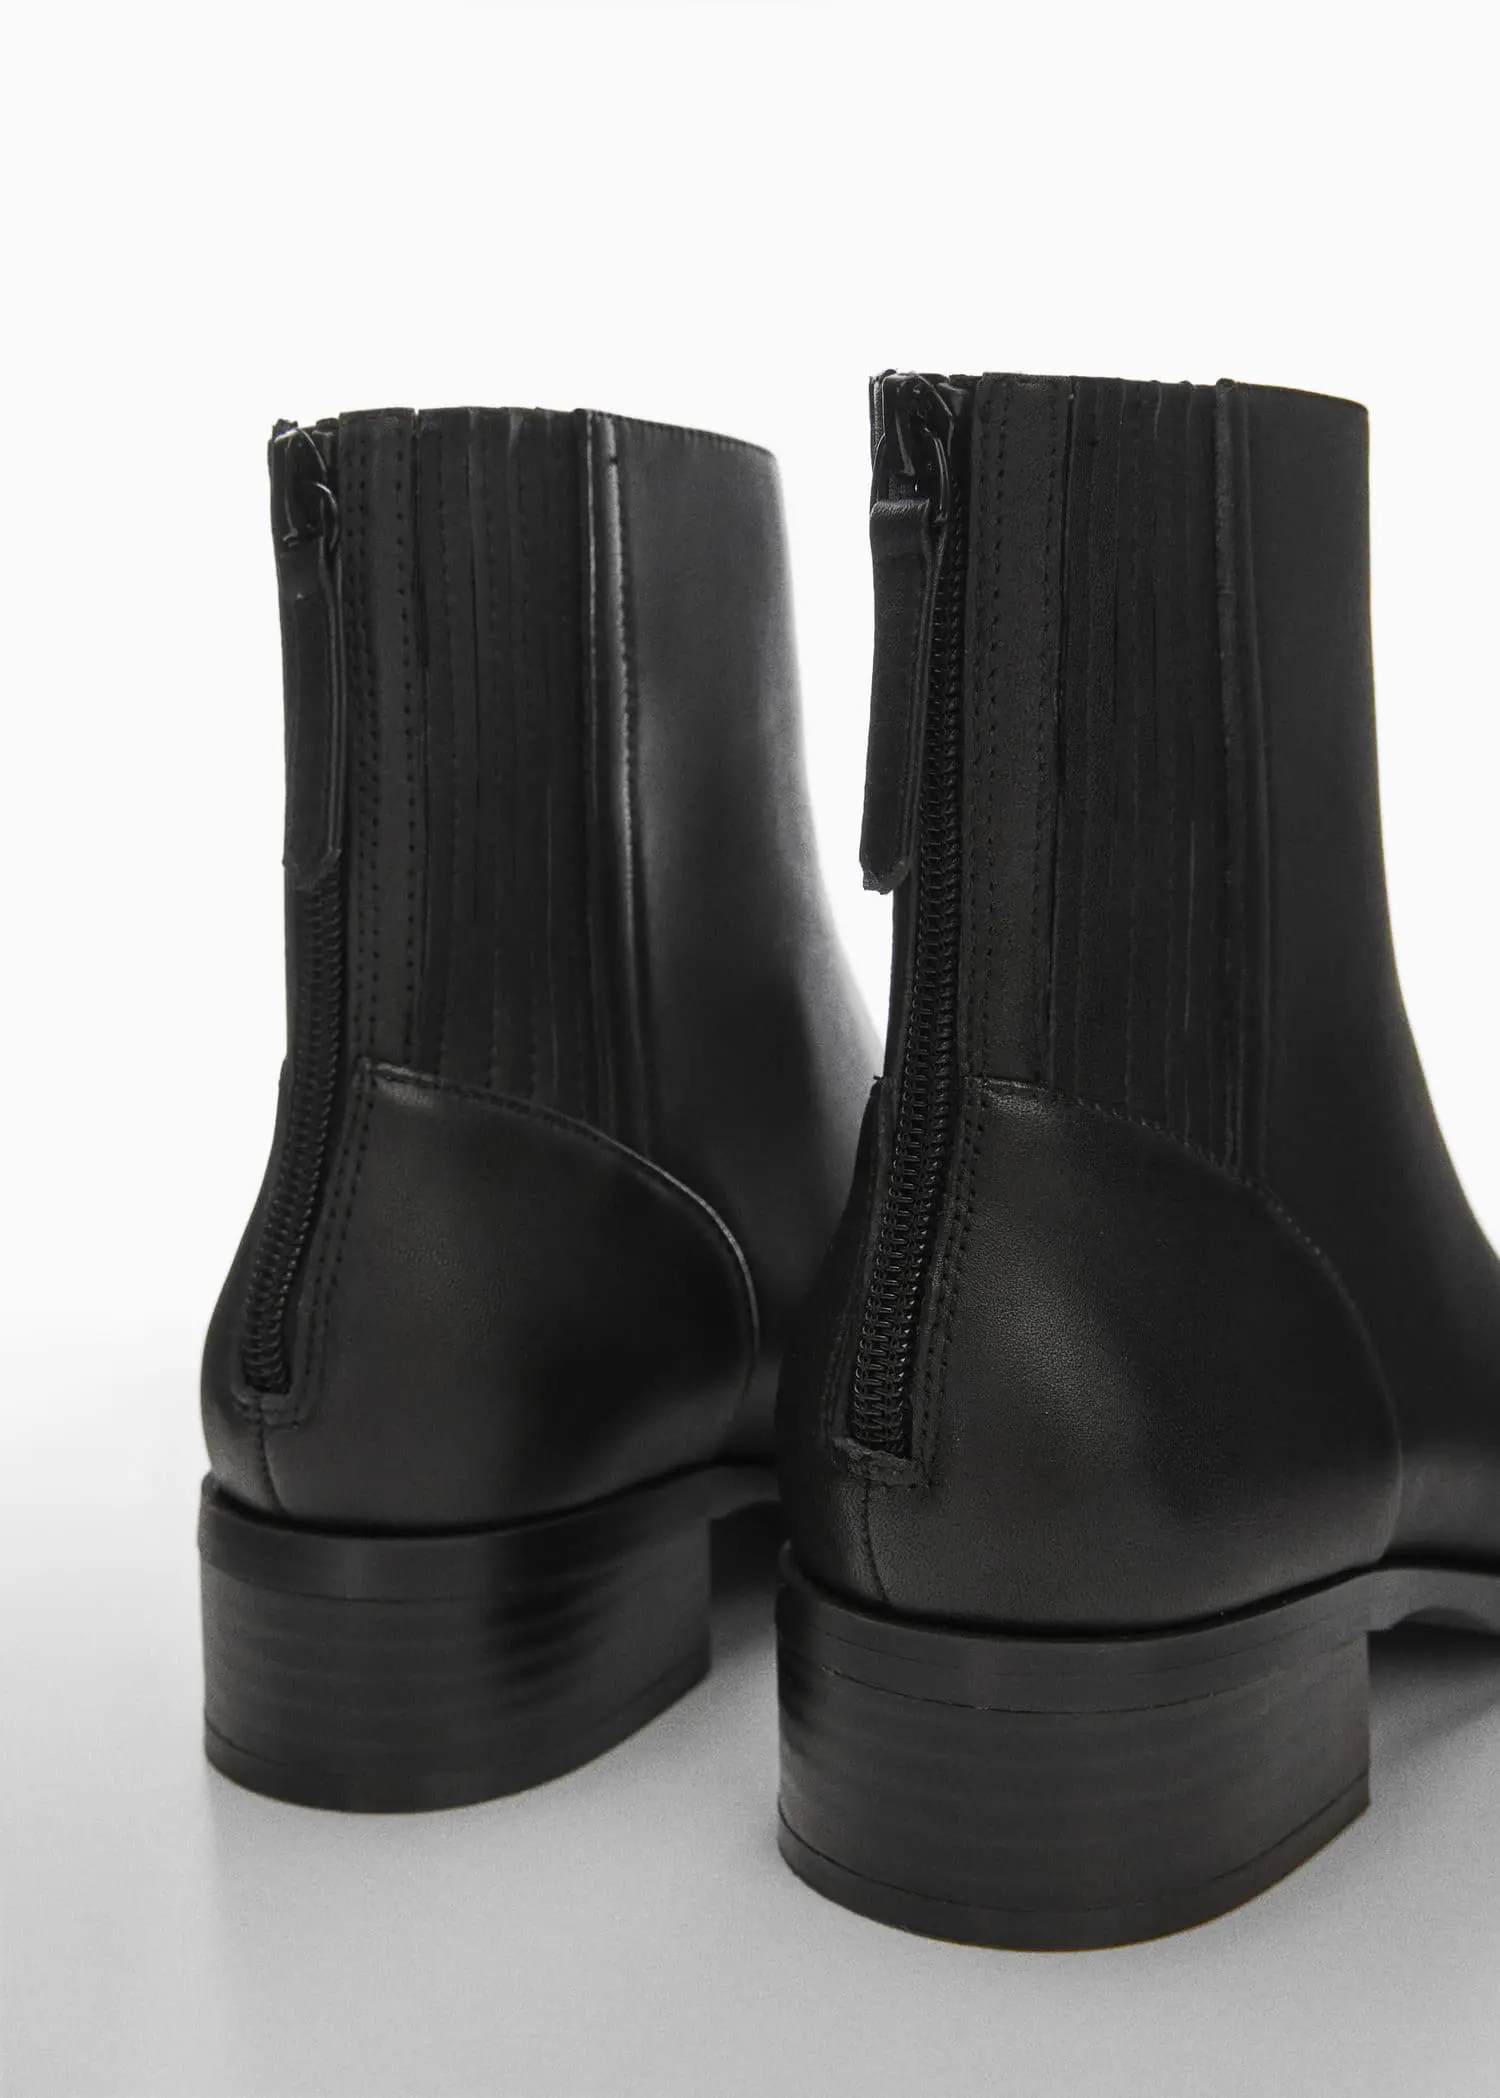 Mango Leather ankle boots with ankle zip closure. 3